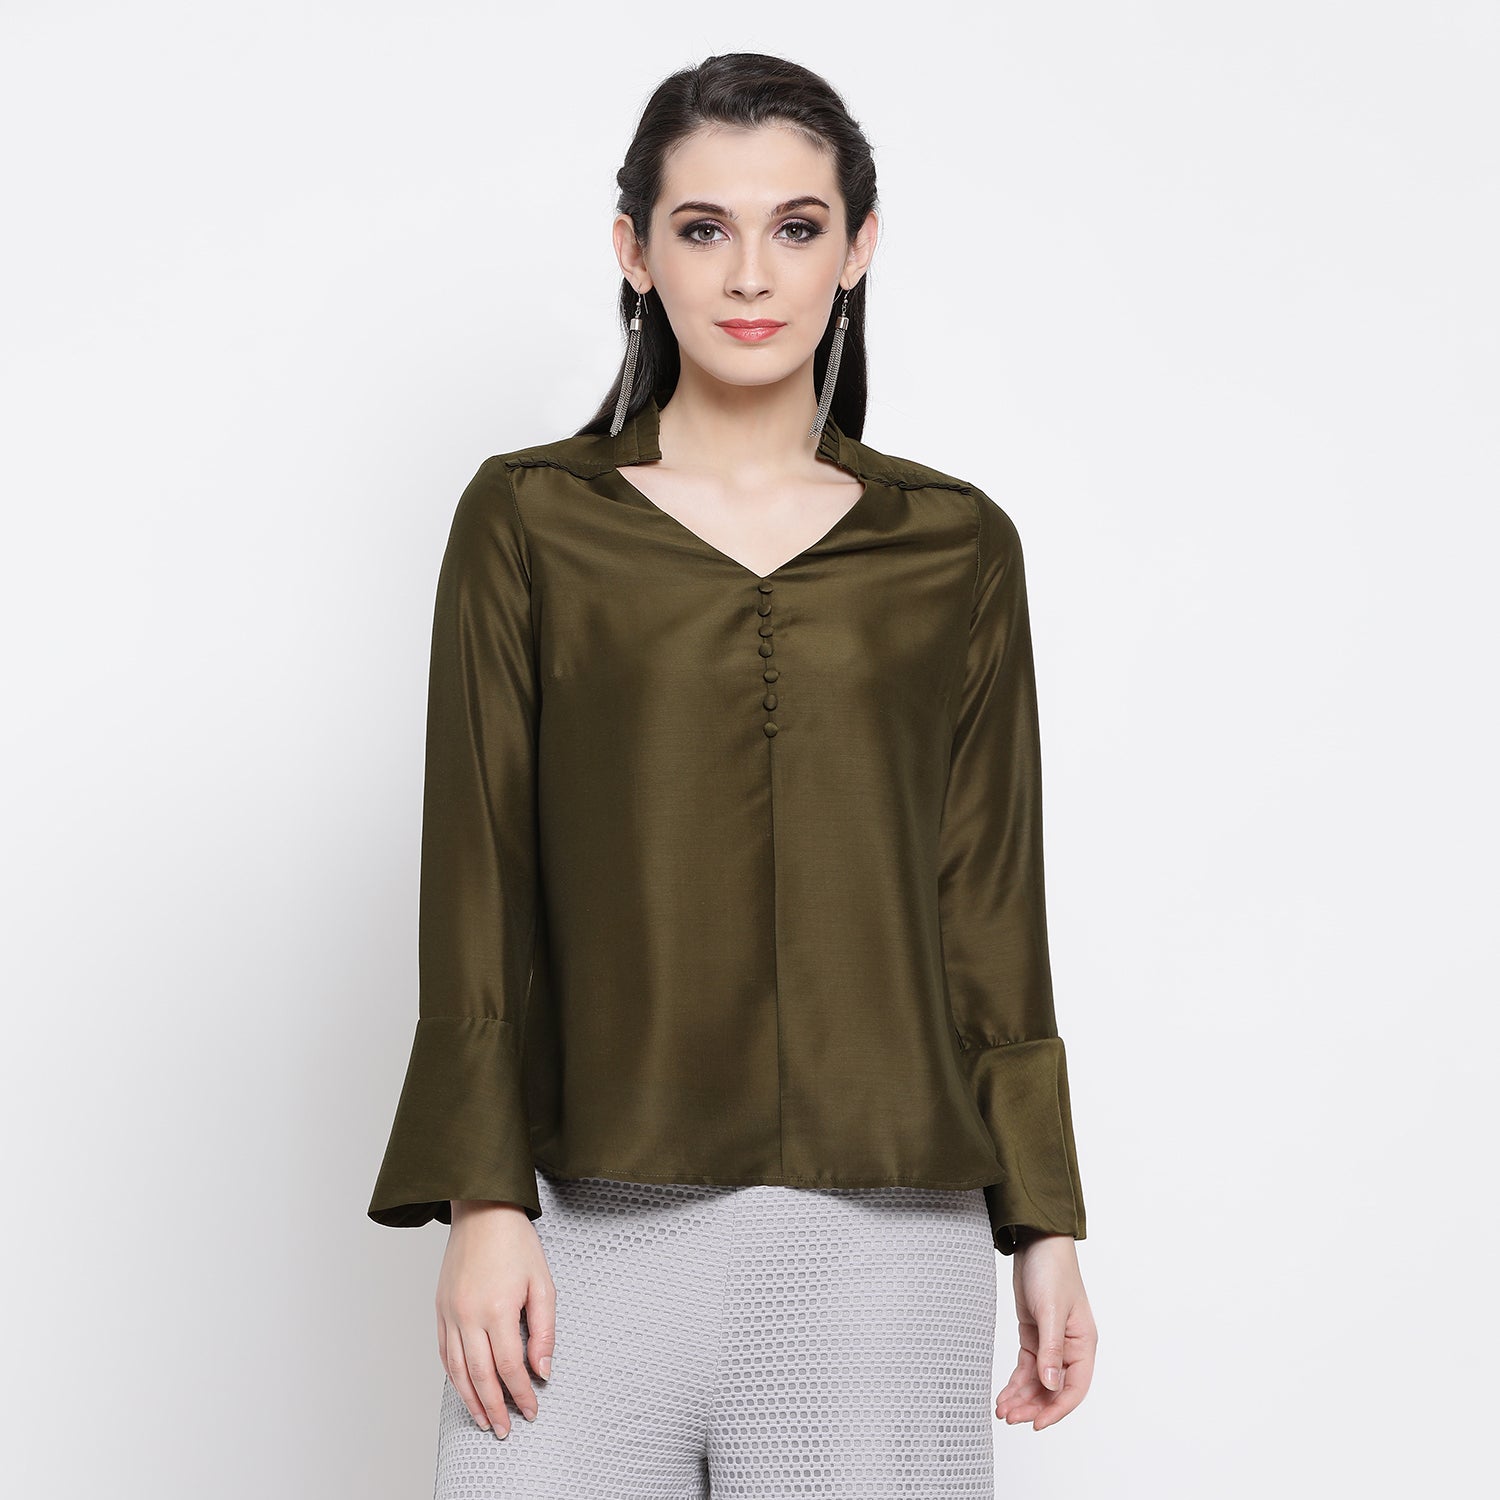 Dark Olive Top With Frill Collar And Buttons